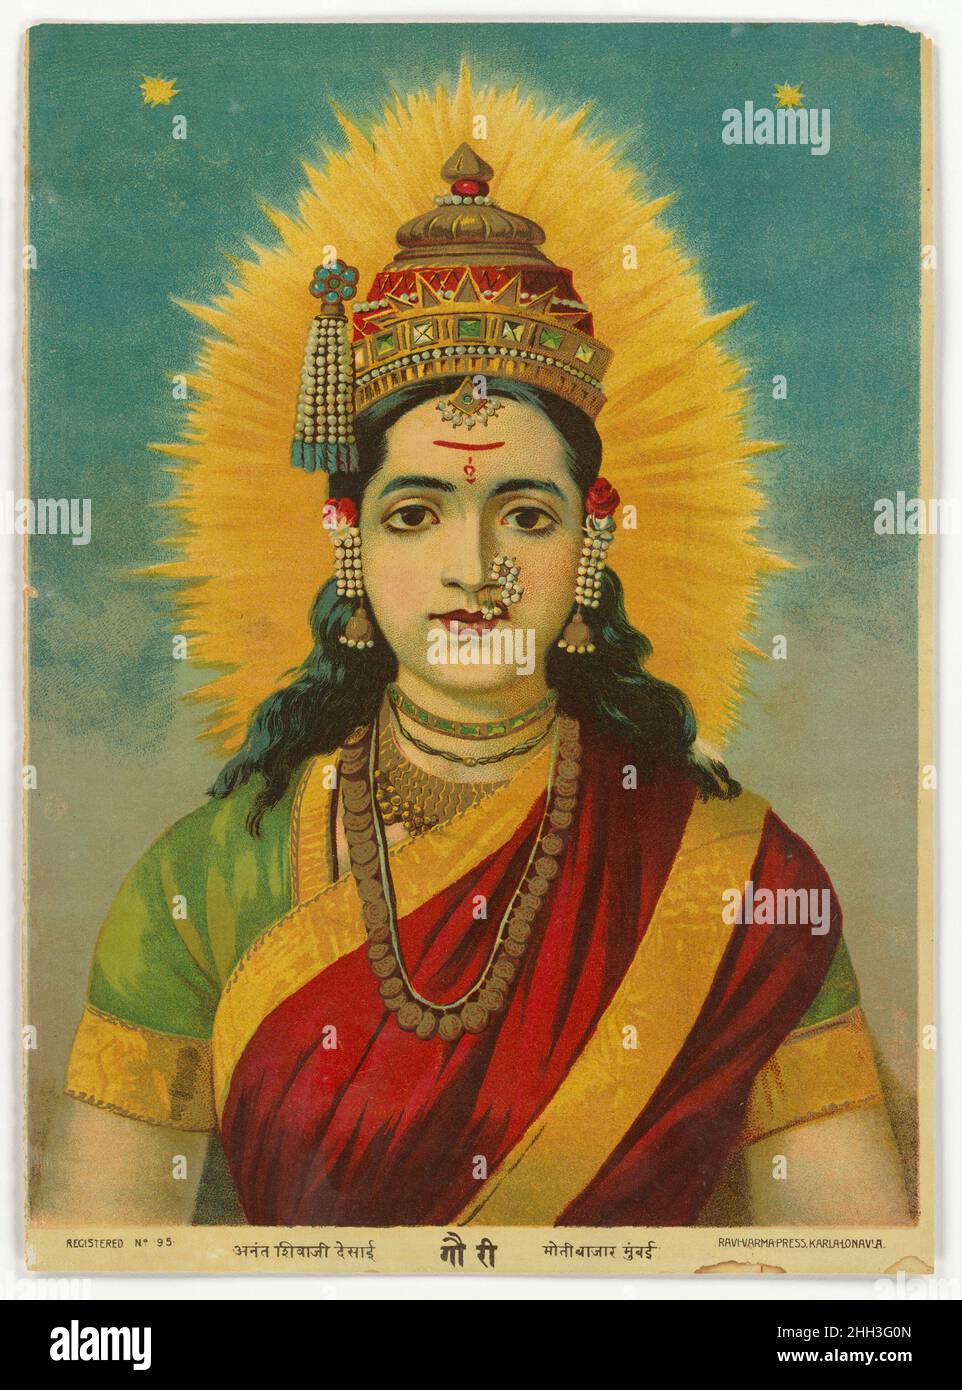 Gauri 1894–99 India, Maharasthra, Pune Gauri is an expression of a tender form of Parvati, the wife and consort of Shiva. In this image, Gauri is represented portrait-like, as if a depiction of a young woman of beauty, not of divinity. Her ‘other’ status is asserted only by the crown she wears, which along with her radiant halo, defines her divine status. In all other respects, she could be mistaken for a young woman prepared for her wedding day.The lower register of the print declares the goddess’s name in devanagari script, along with the name of the press 'Ravi Varma Press, Karla-Lonavia', Stock Photo